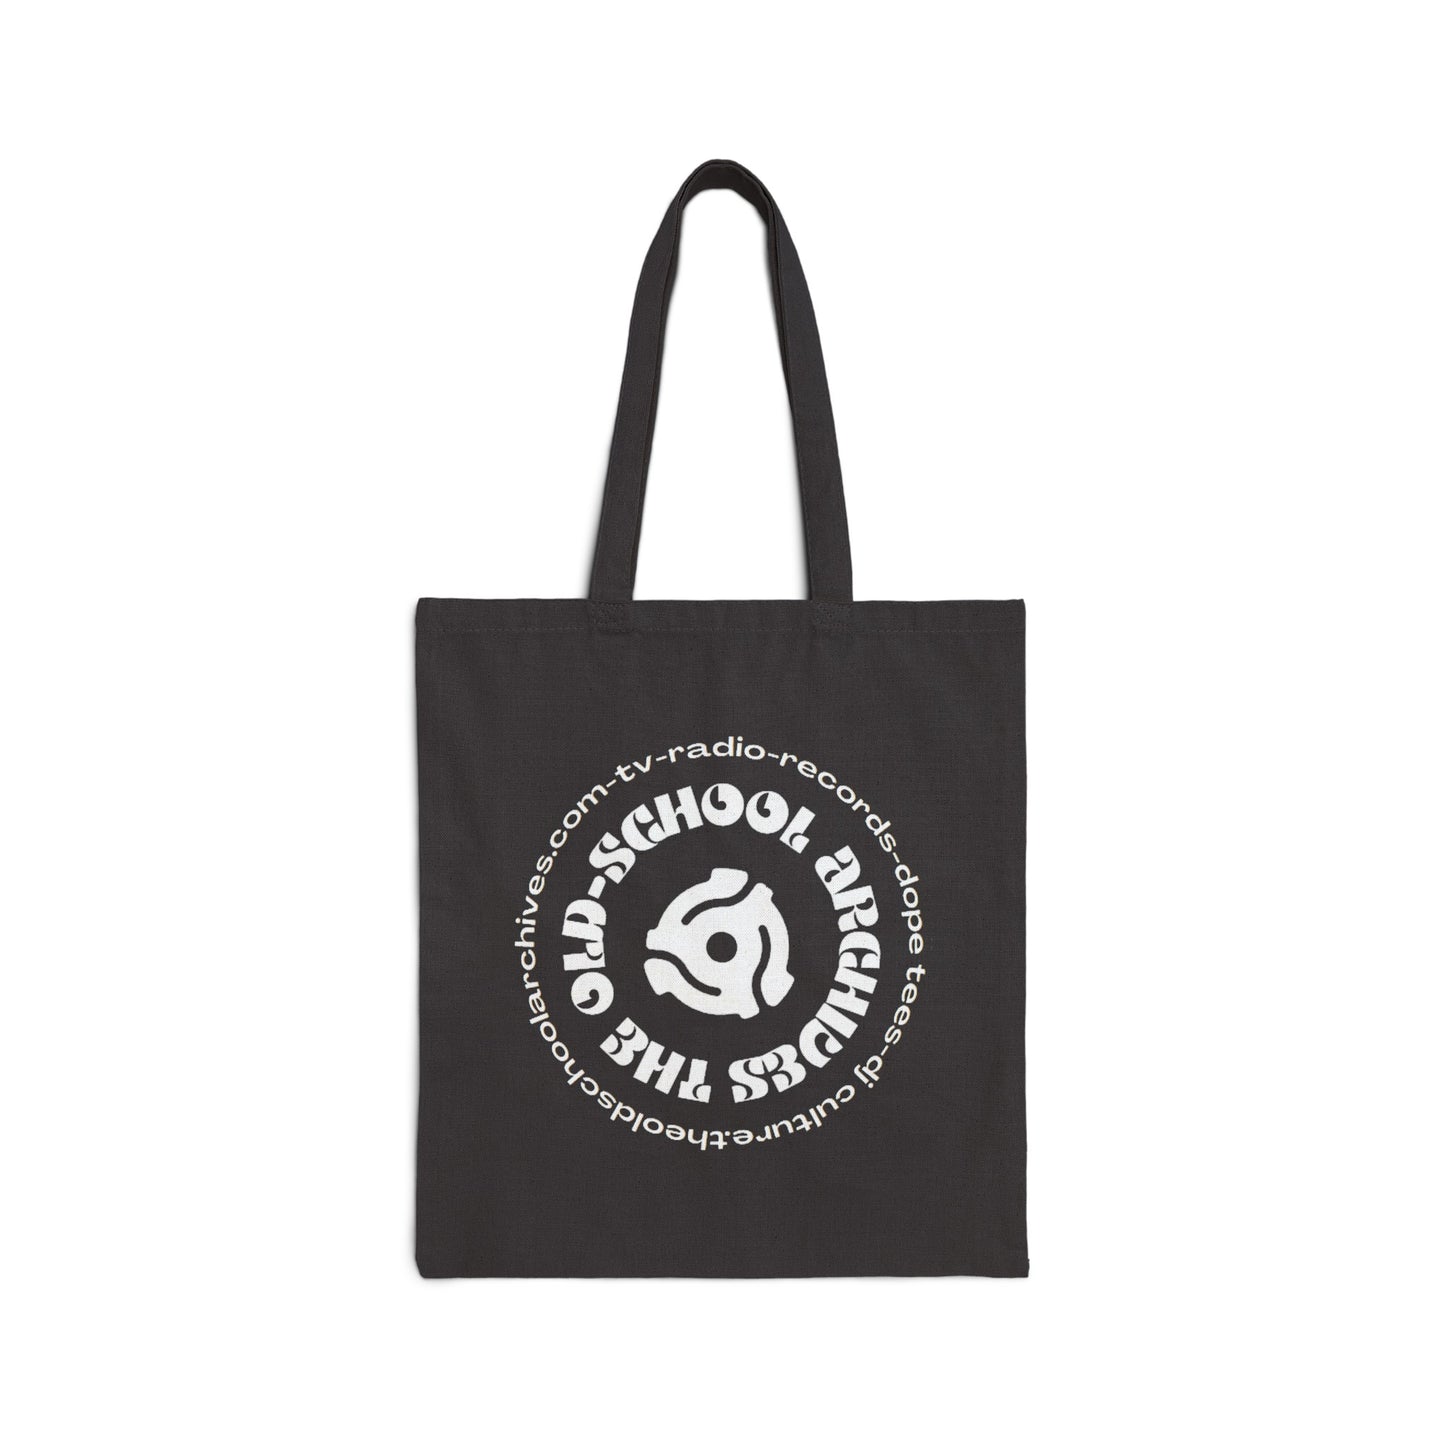 The Old-School Archives Canvas Vinyl Record Shopping Bag